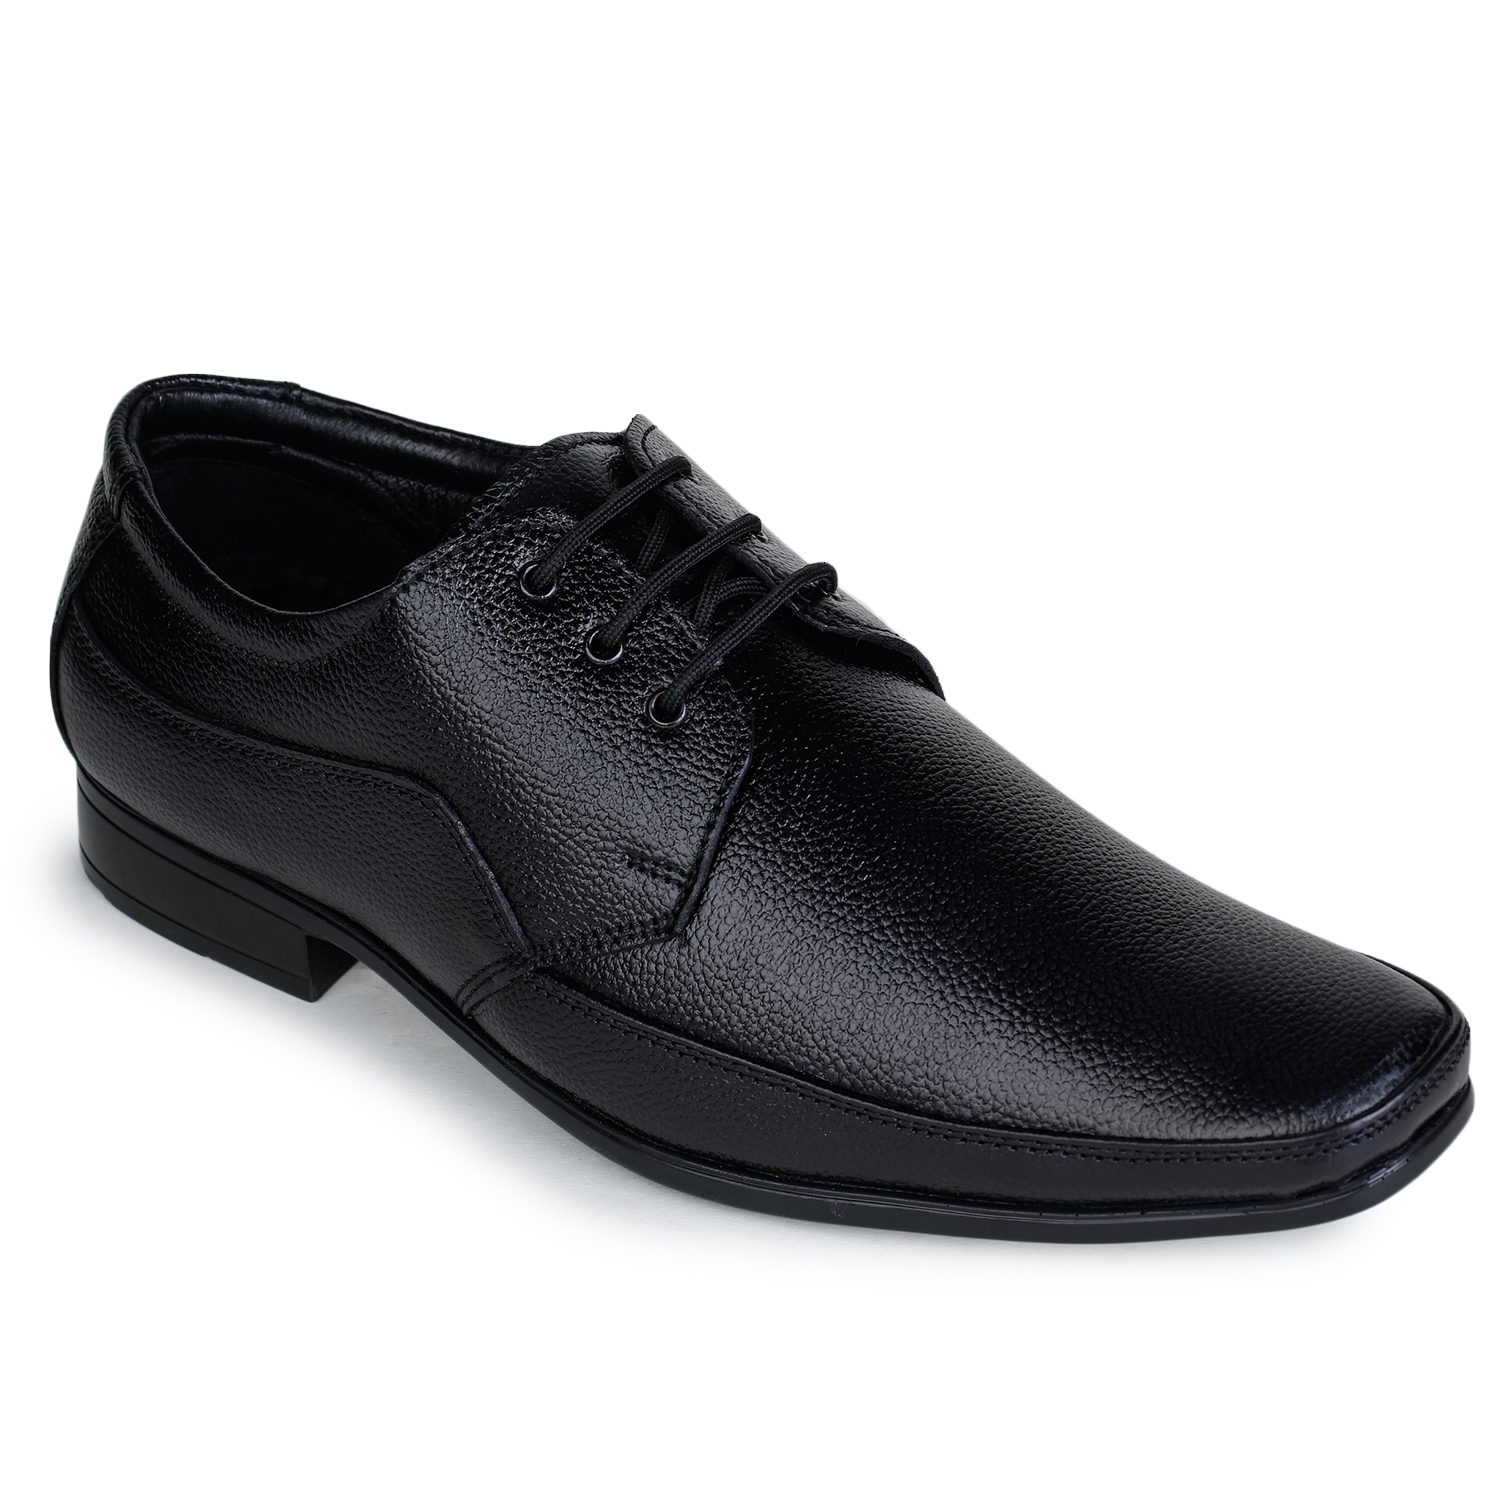 Liberty | Liberty Fortune Black Formal Derby Shoes HOL-14_Black For - Men